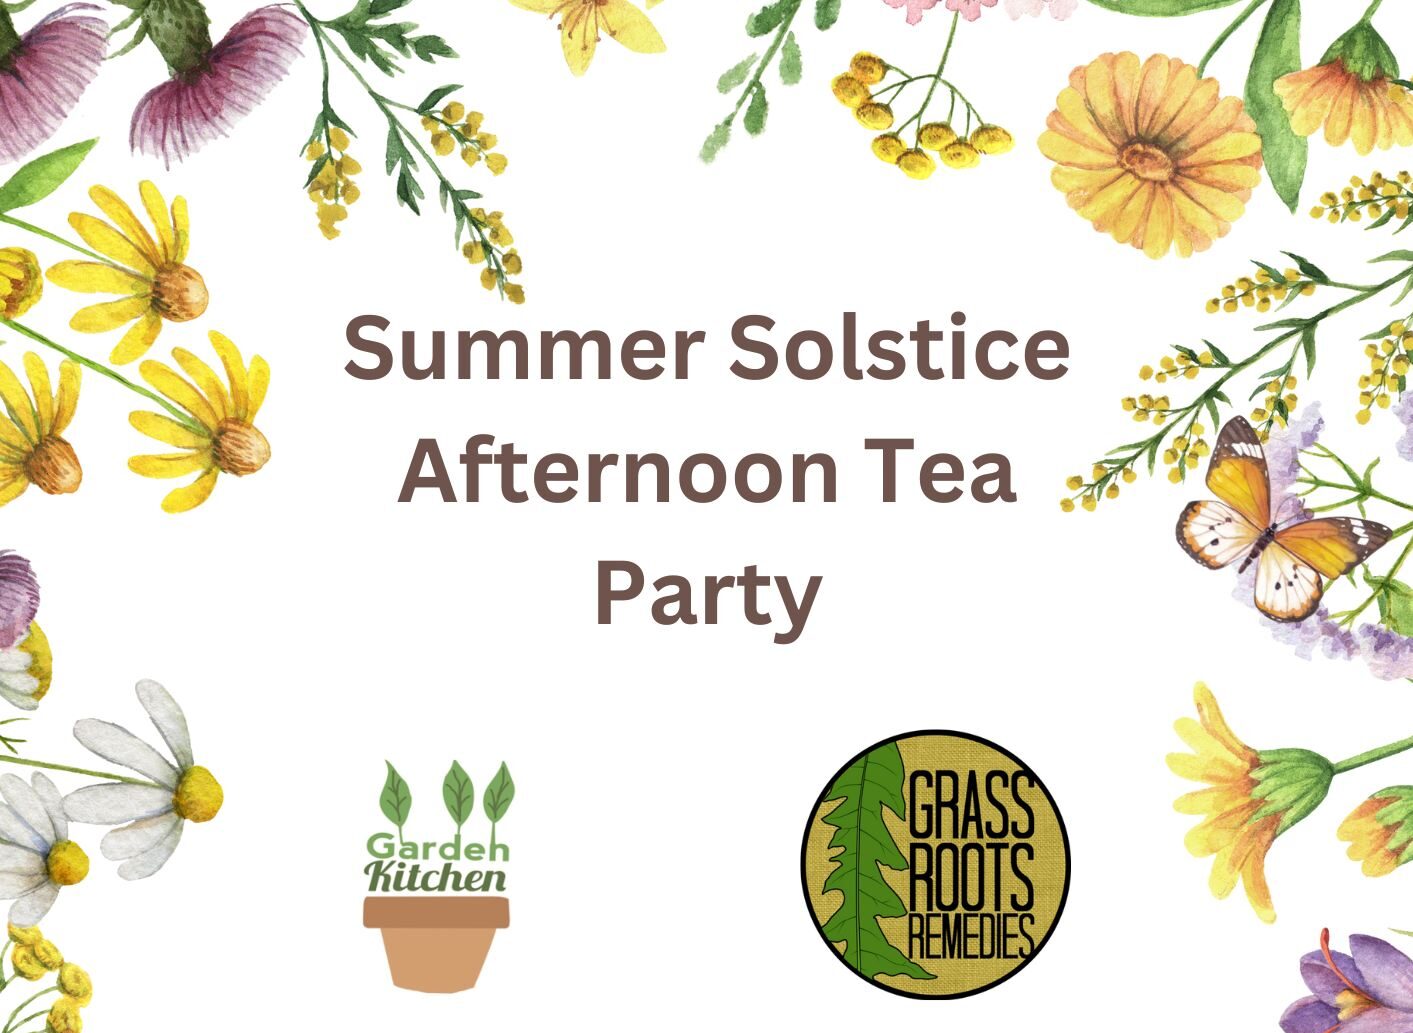 Summer Solstice afternoon tea party featured image